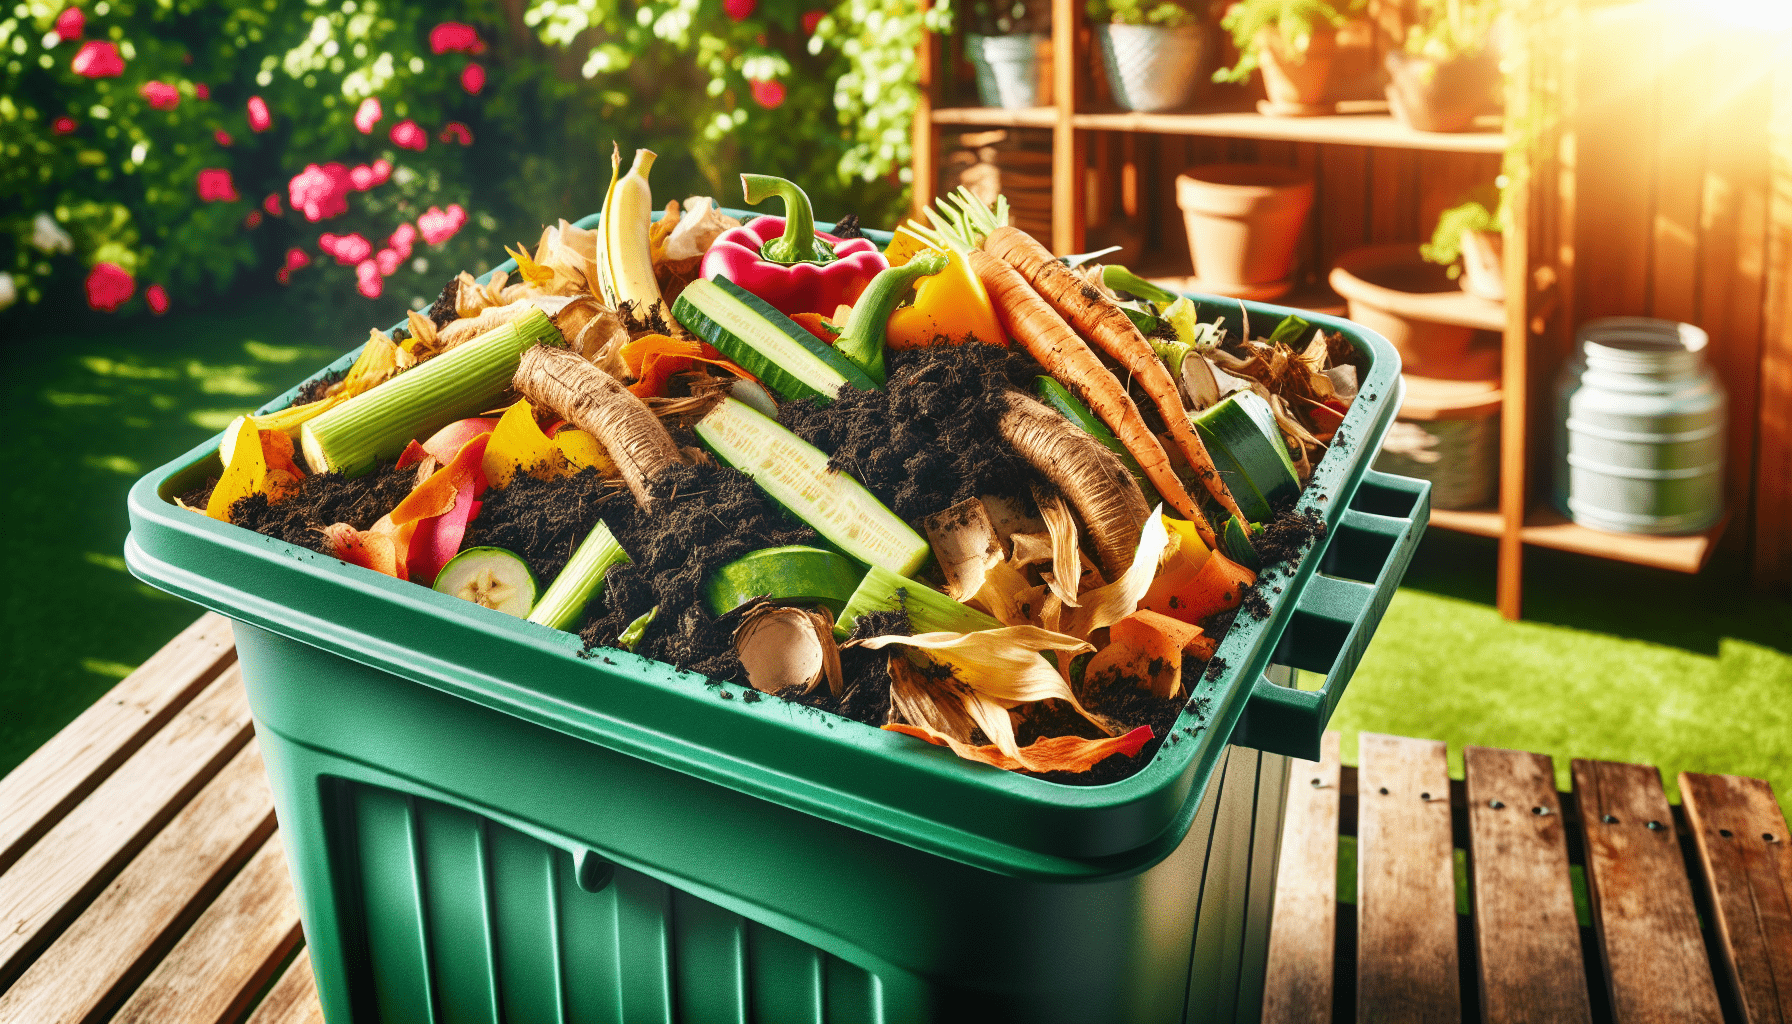 How Can I Compost Food Scraps At Home?